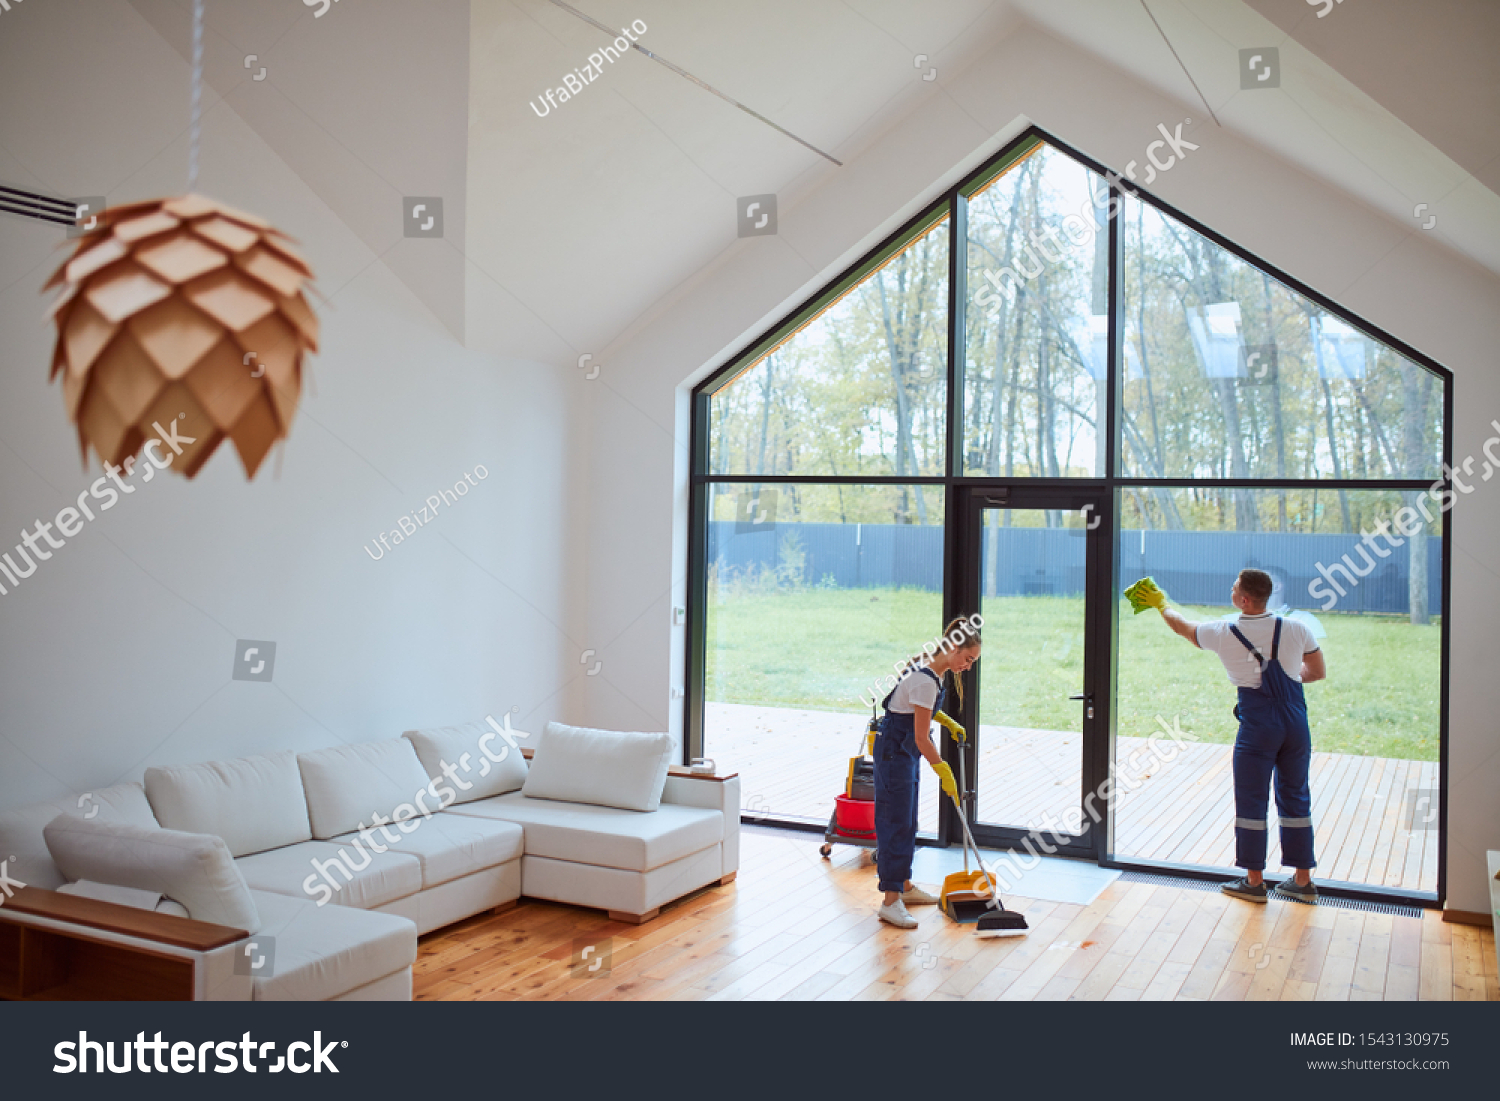 Preparing house for new tenant. Cleaning service washing floor, window. Man cleaning panoramic window with view on garden. Woman sweeping the floor #1543130975